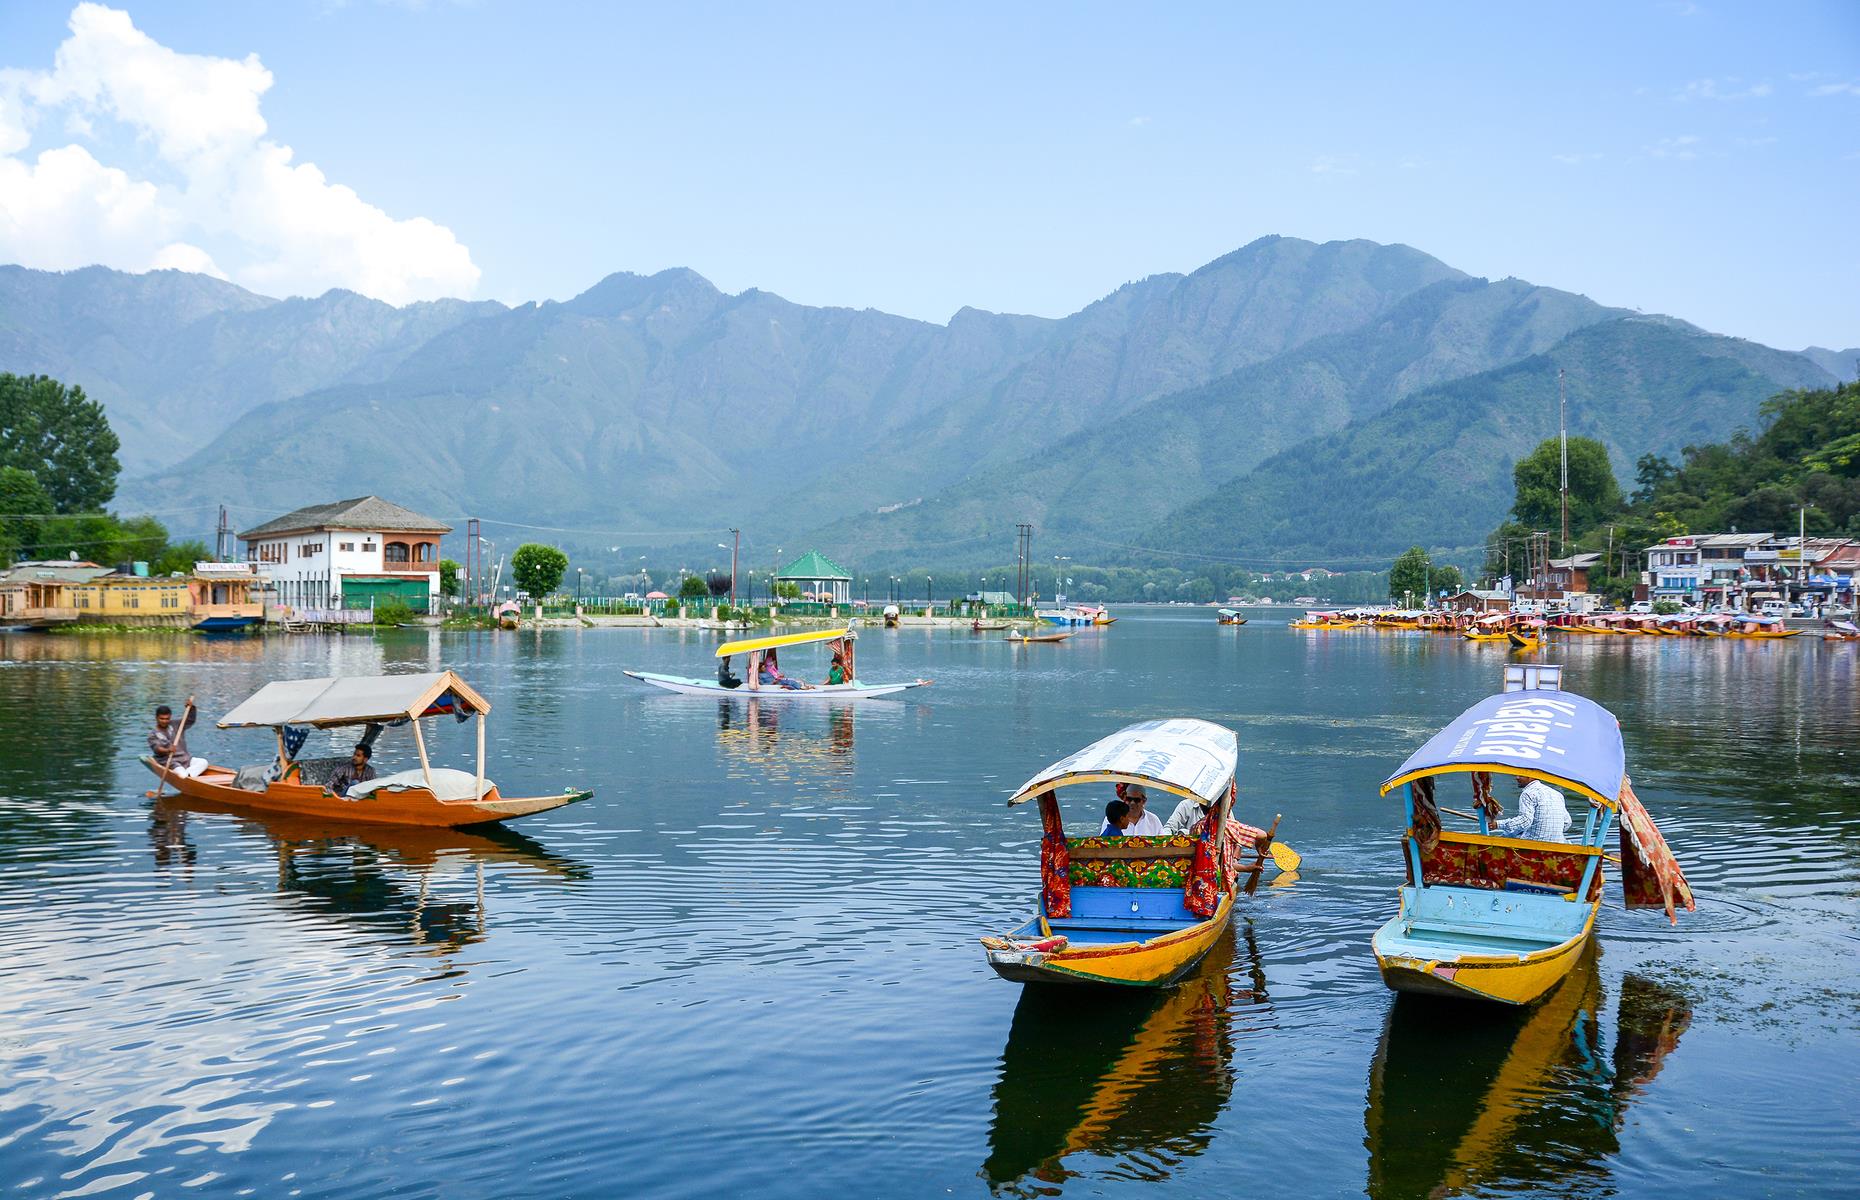 <p>The sight of this serene lake against the striking backdrop of the Pir Panjal mountains makes it one of the most popular spots in India's Himalayan region. Visitors can sleep in a houseboat and take shikara (small boats) to the colorful floating flower and vegetable markets.</p>  <p>Don’t miss the elegant terraced hillside gardens, created by Mughal emperors, on the eastern shore.</p>